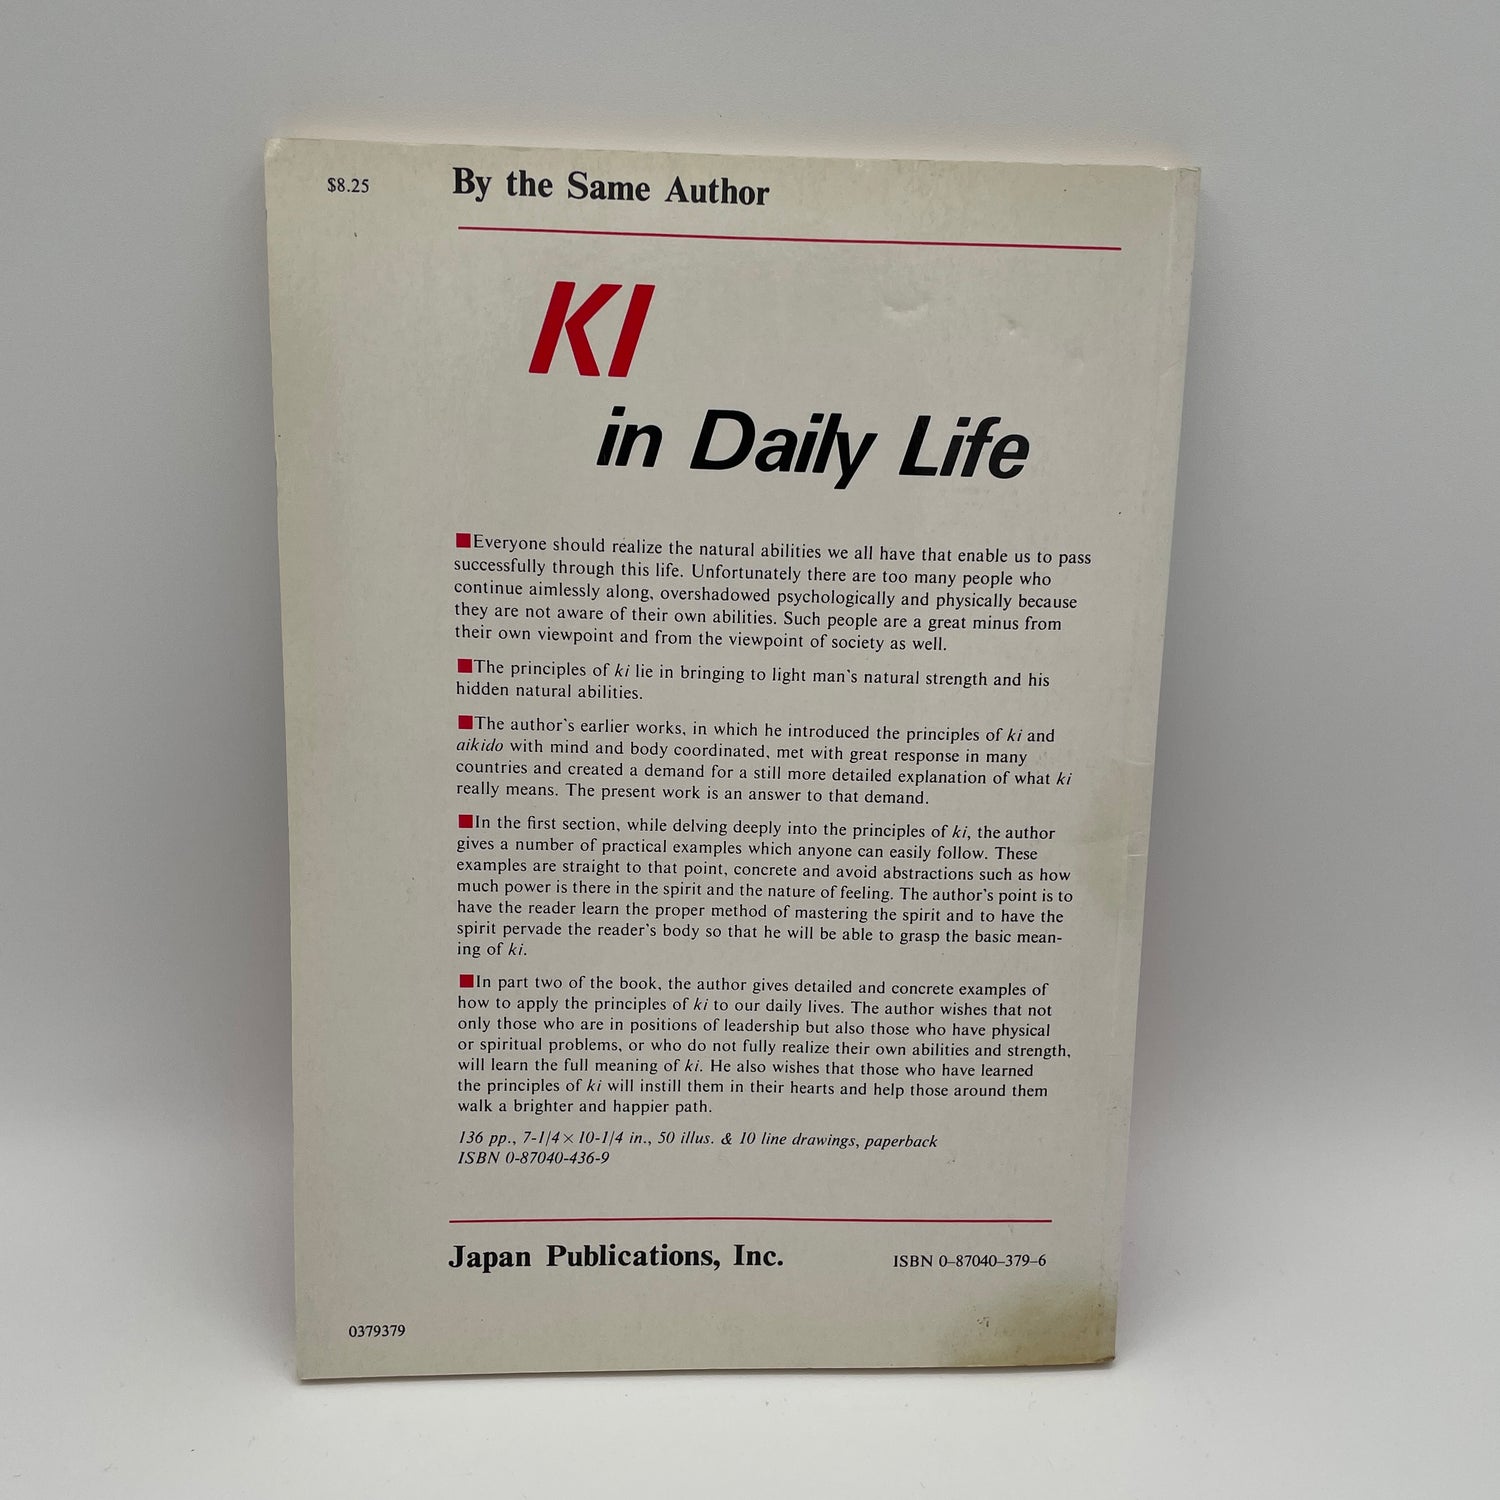 Book of Ki: Coordinating Mind & Body in Daily Life by Koichi Tohei (Preowned)